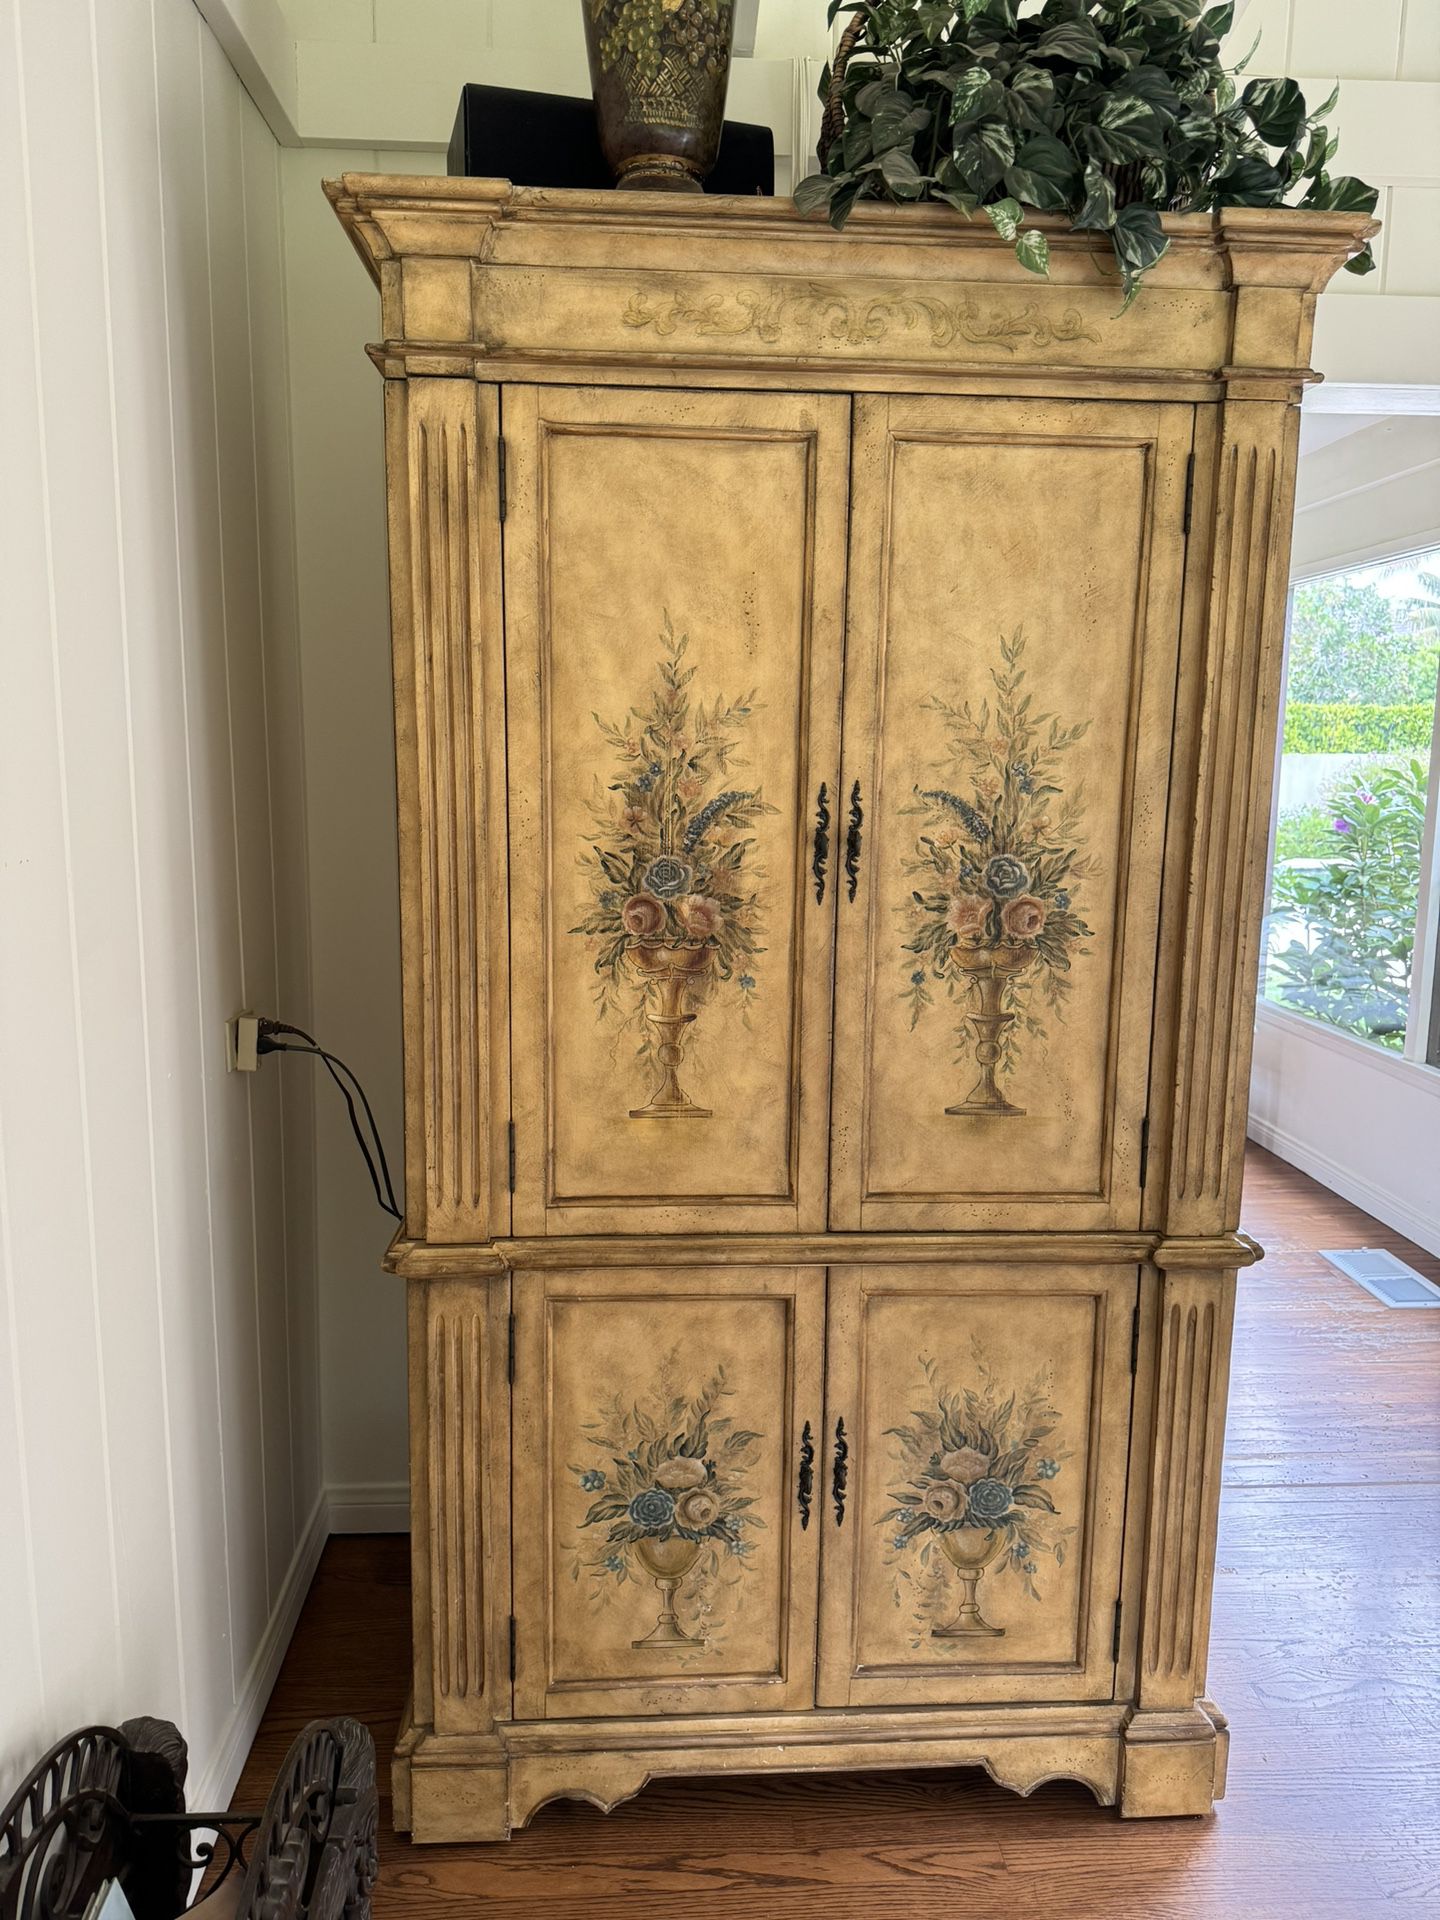 Floral French Inspired TV Armoire / Media Center